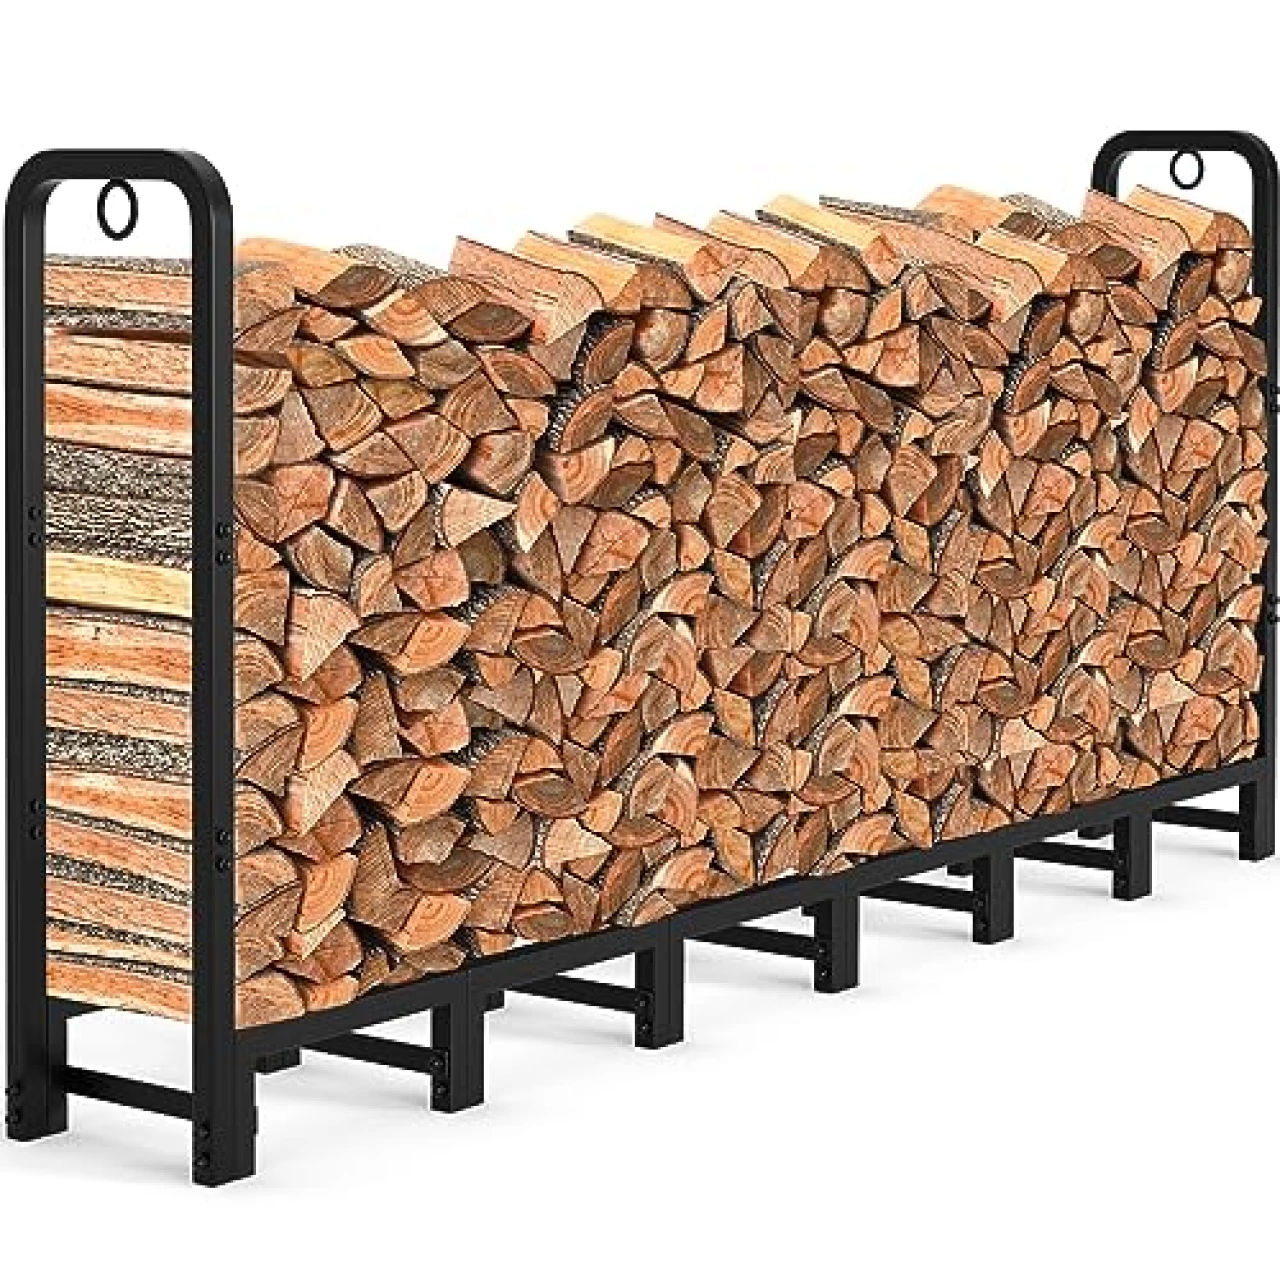 AMAGABELI GARDEN &amp; HOME 8ft Outdoor Fire Rack, Fireplace Heavy Duty Firewood Pile Storage Racks For Patio Deck Metal Log Holder Stand Tubular Steel Wood Stacker Outside Tools Accessories Black